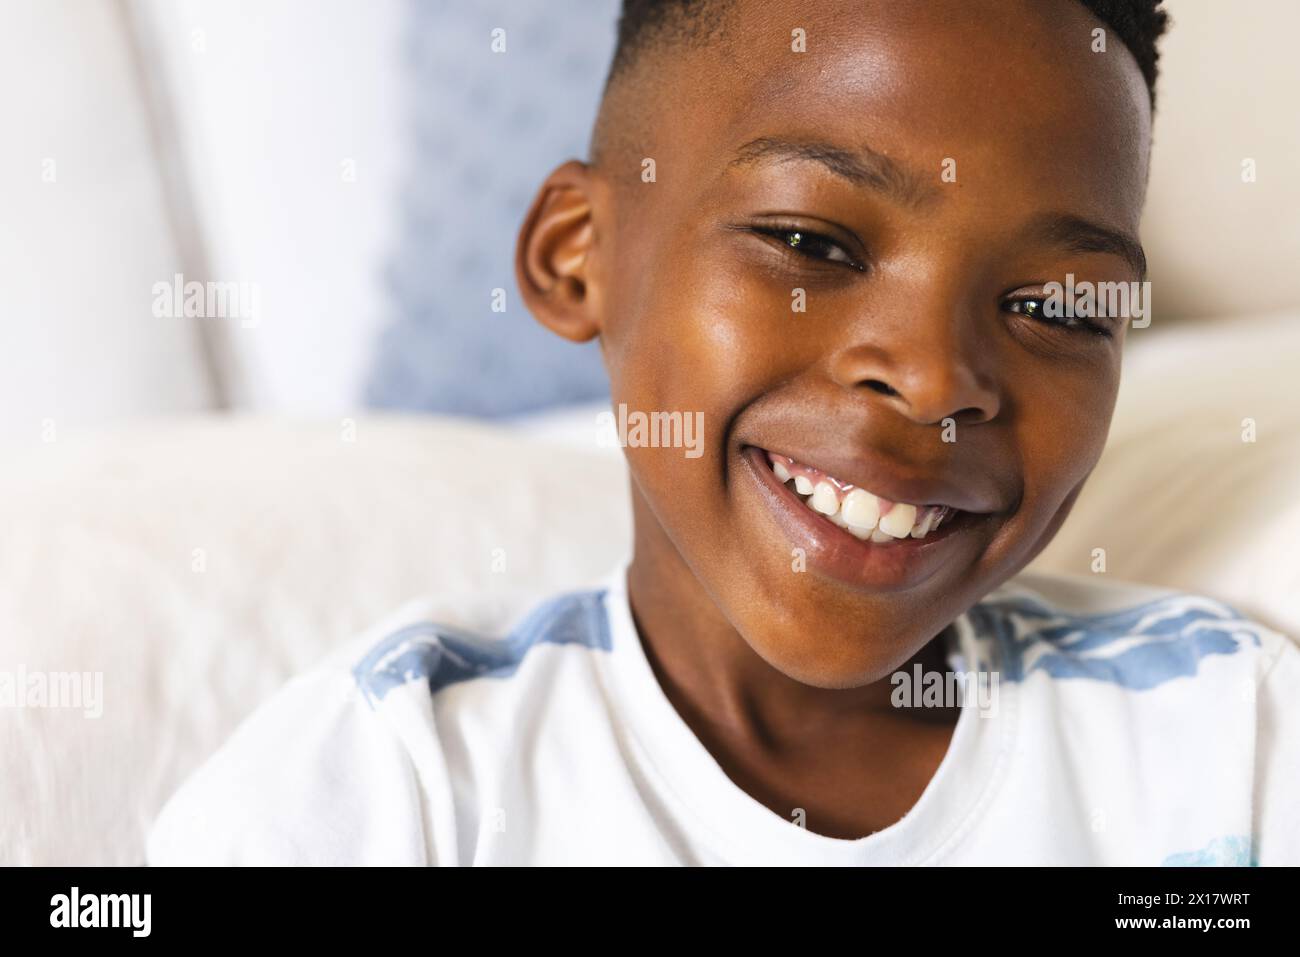 African American boy wearing white shirt is smiling at camera at home. His skin is smooth, hair short and black, eyes brown, expressing joy, unaltered Stock Photo